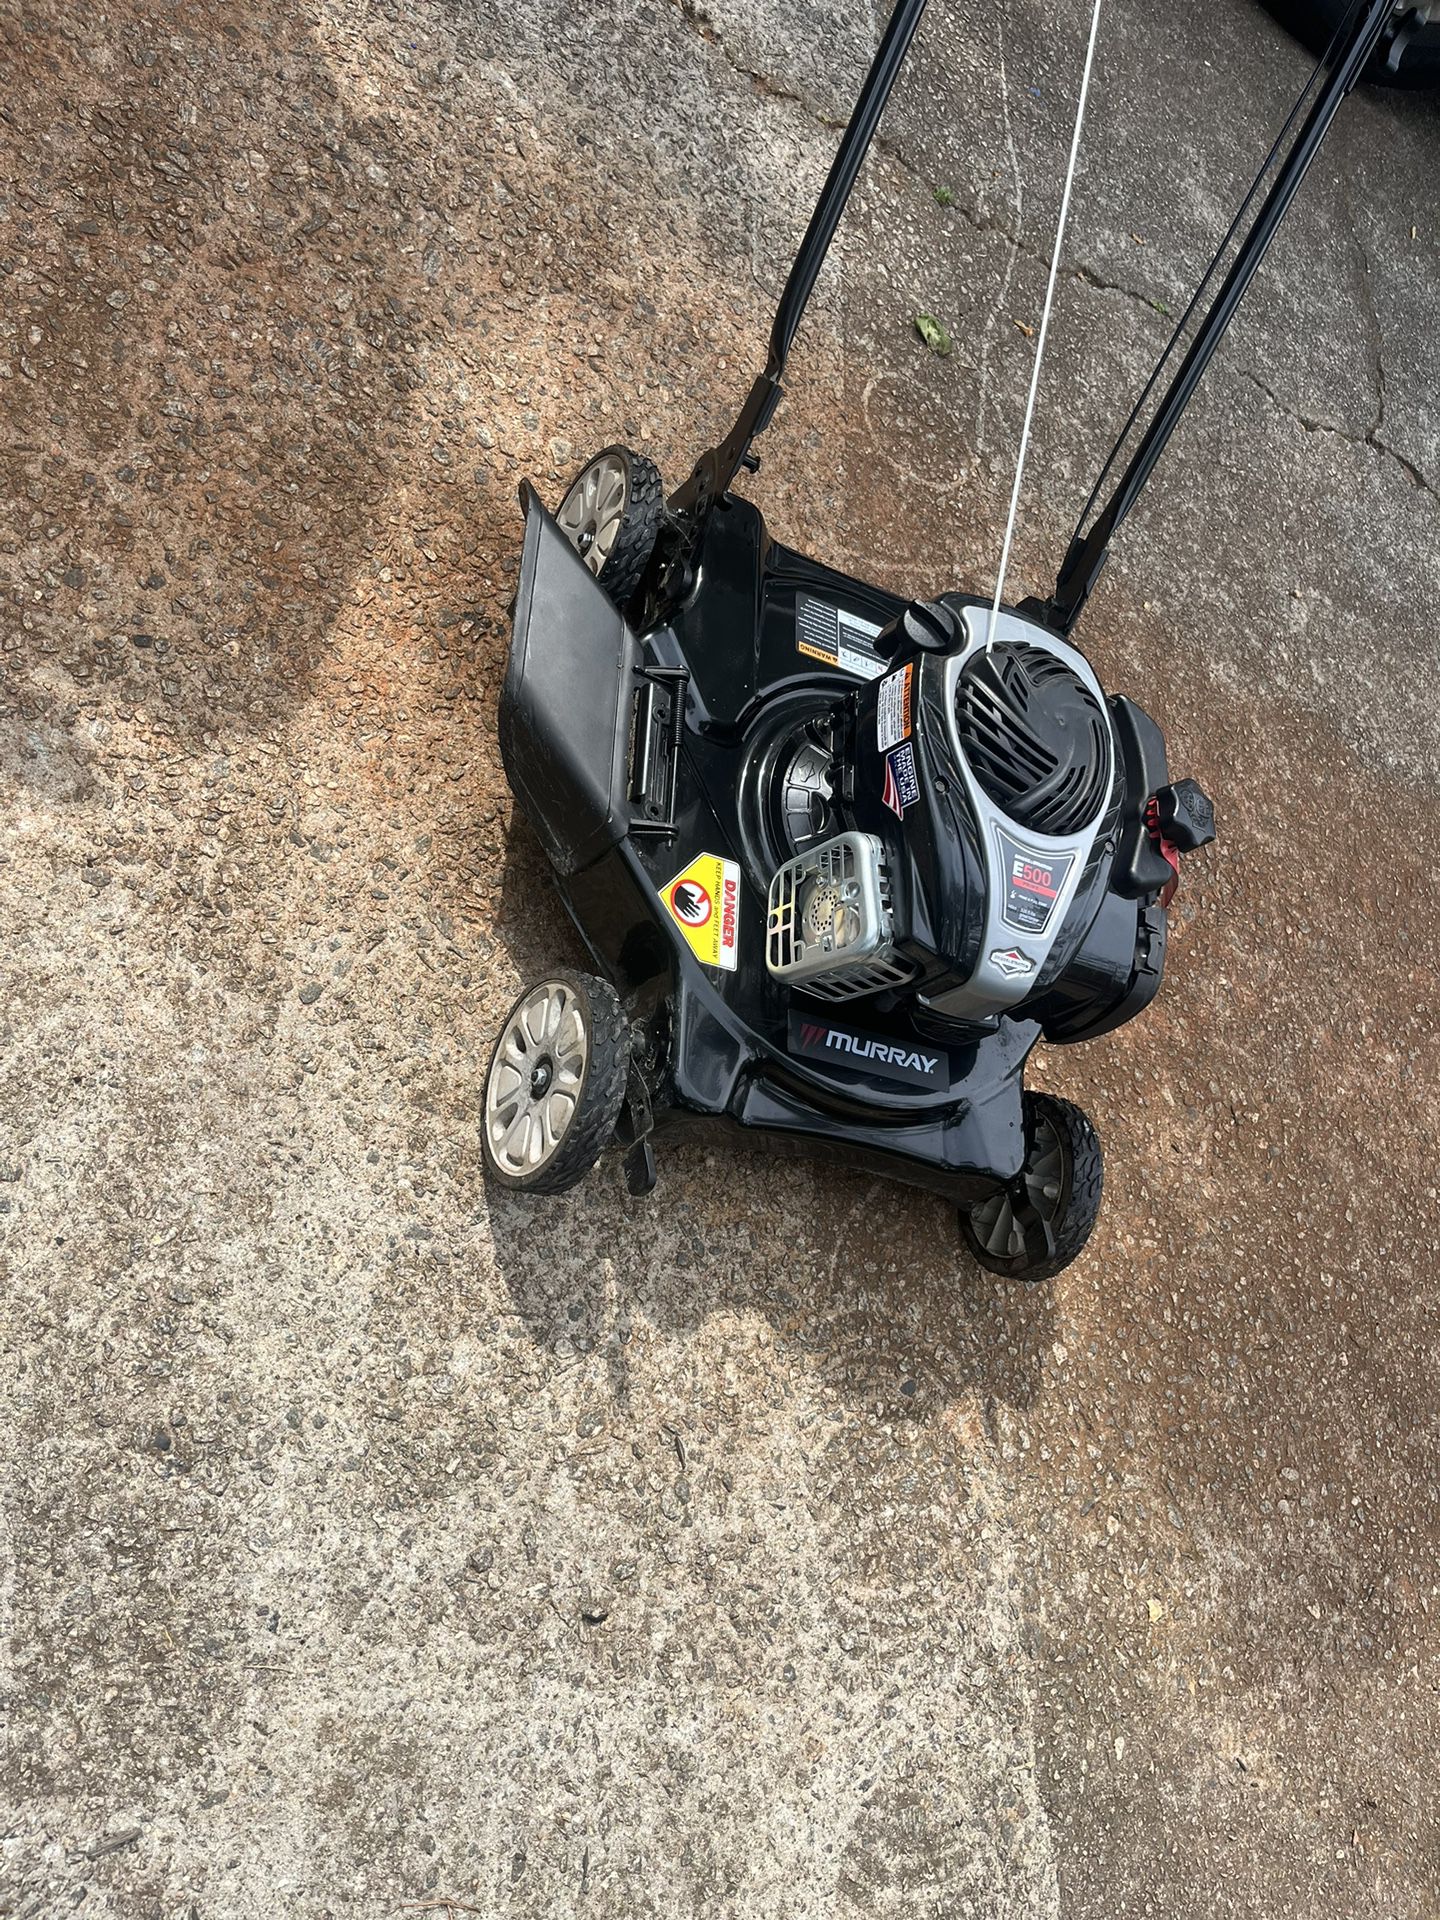 Murray 20 in. 125 cc Briggs & Stratton Walk Behind Gas Push Lawn Mower with 4 Wheel Height Adjustment and Prime 'N Pull Start used 120